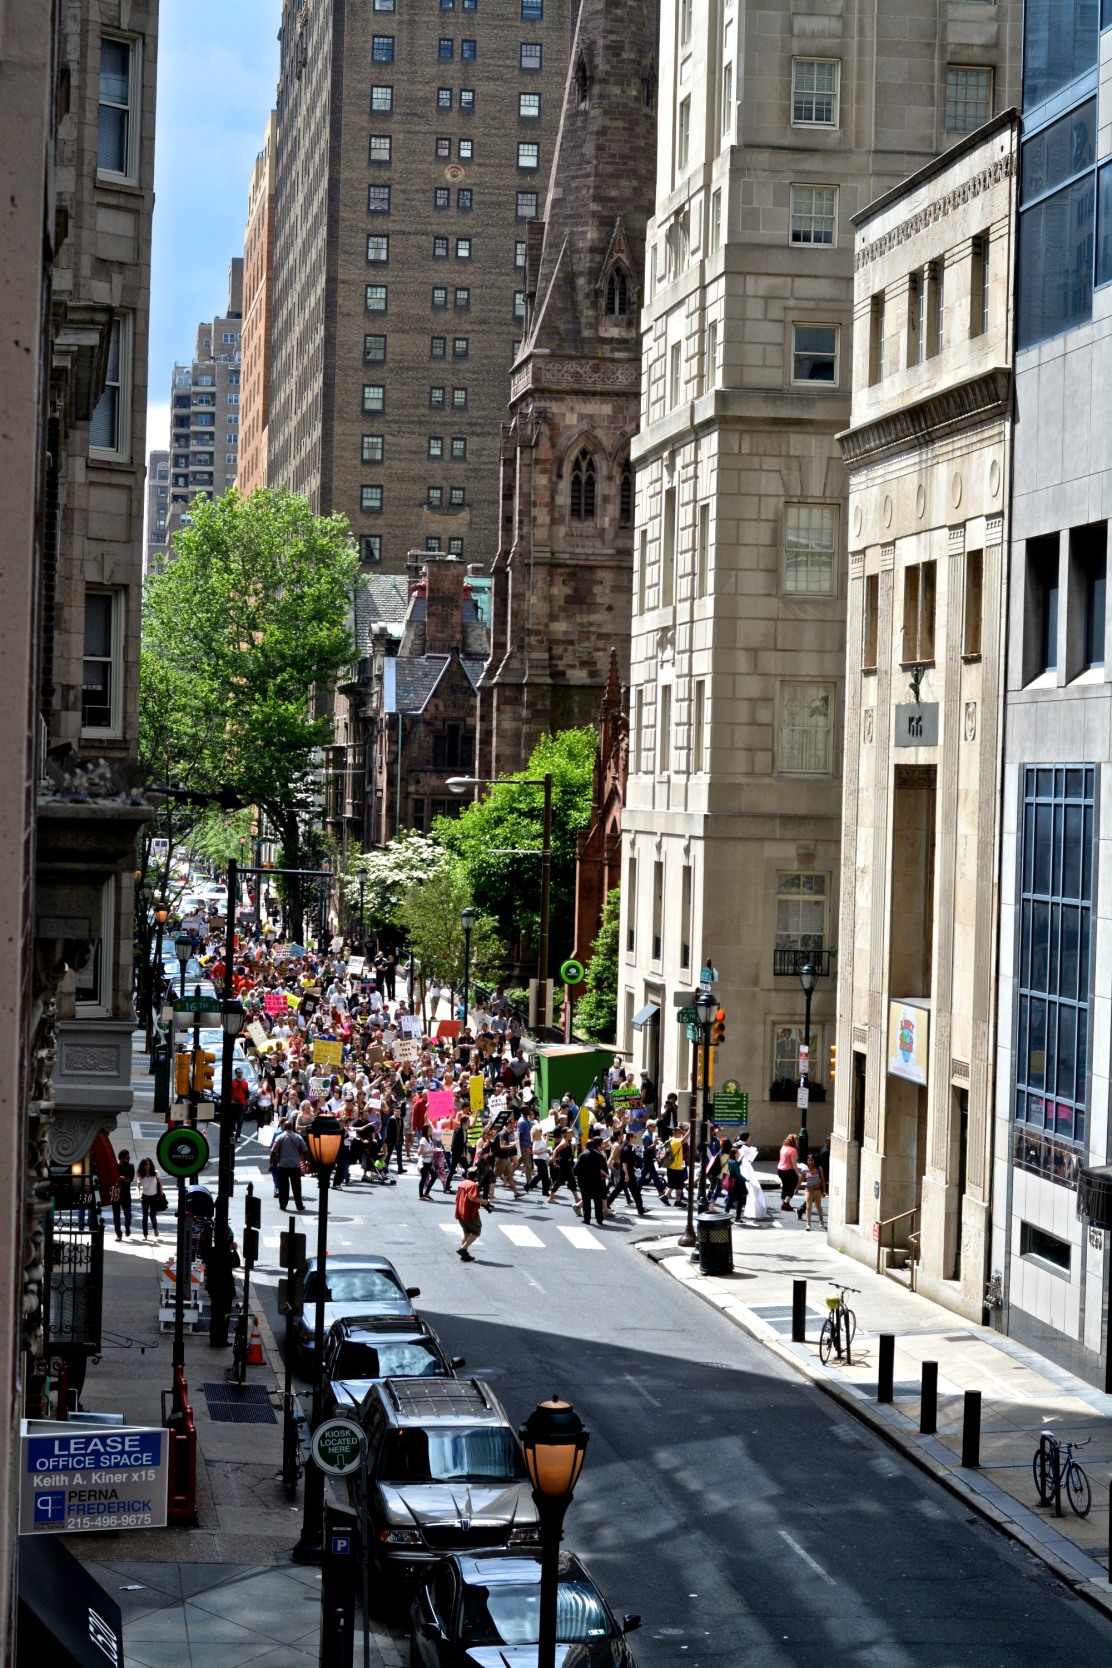 Protesters marching through the streets of Center City. Photo by Joshua Albert